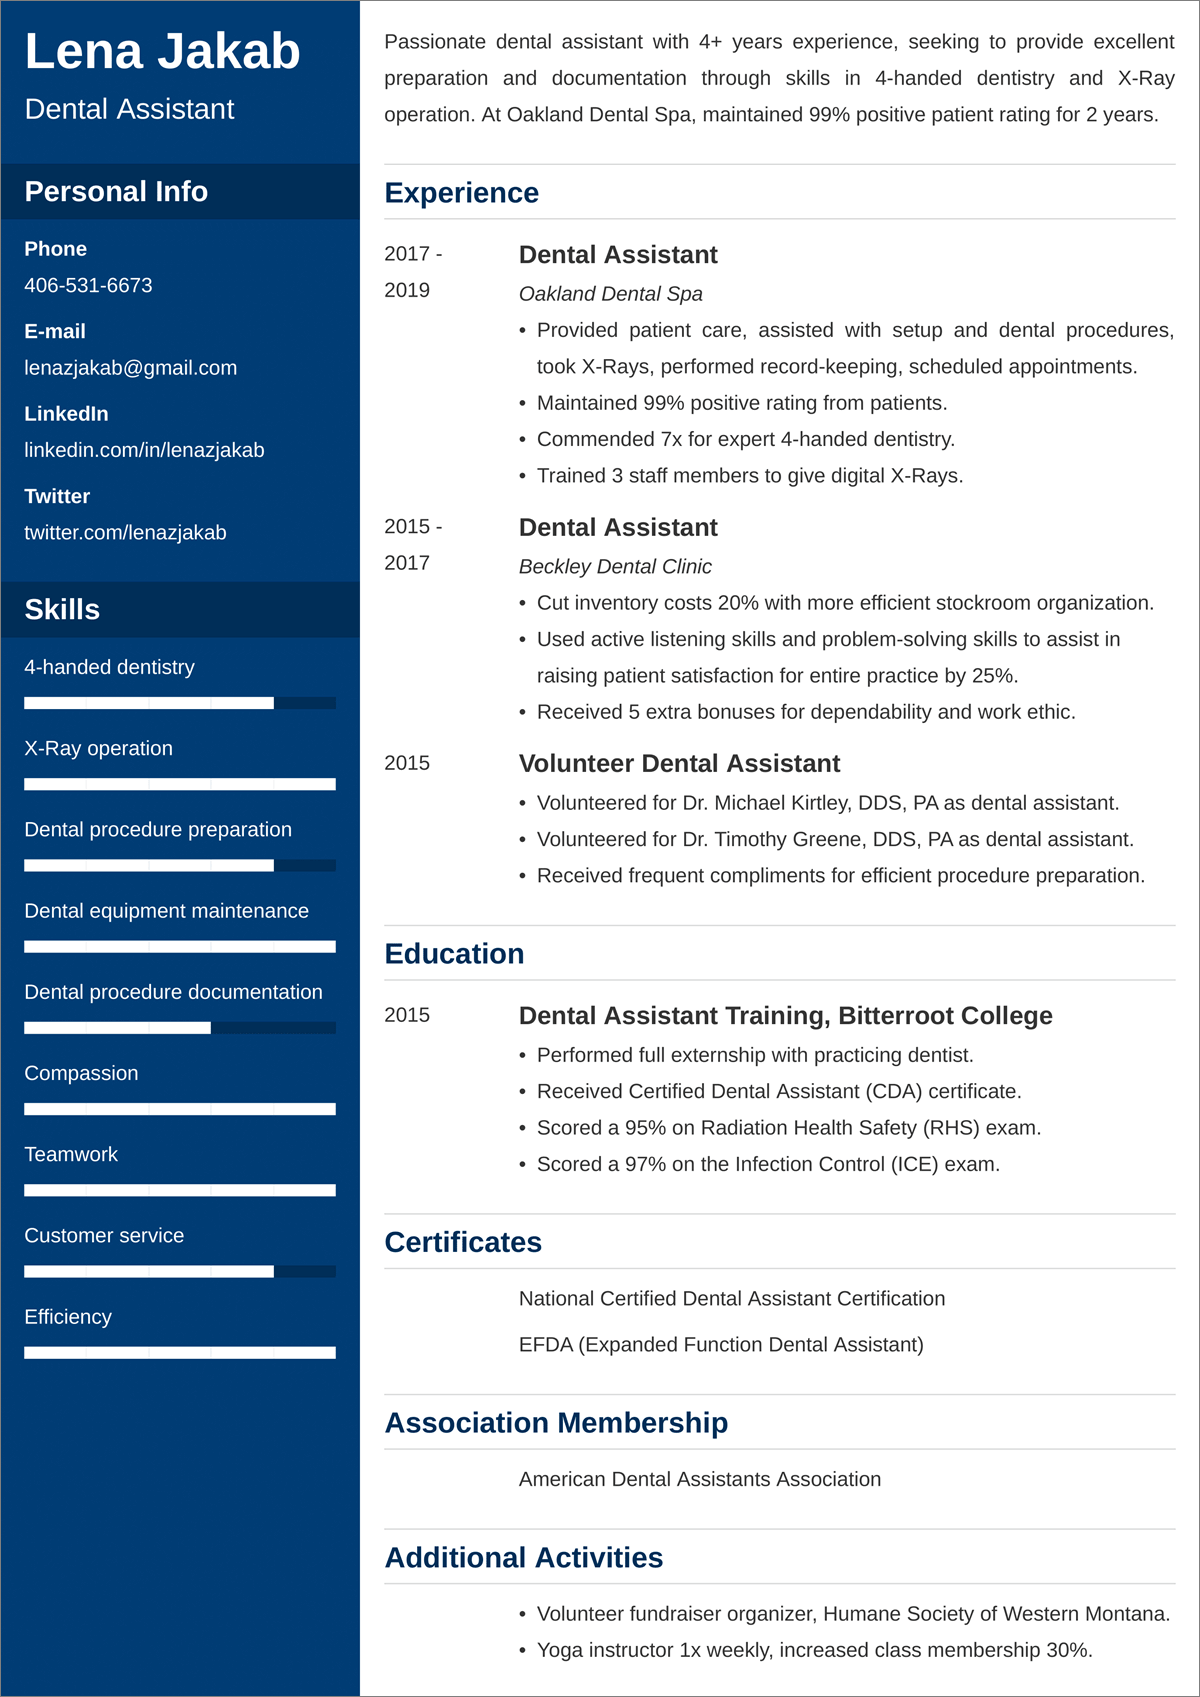 dental assistant resume example